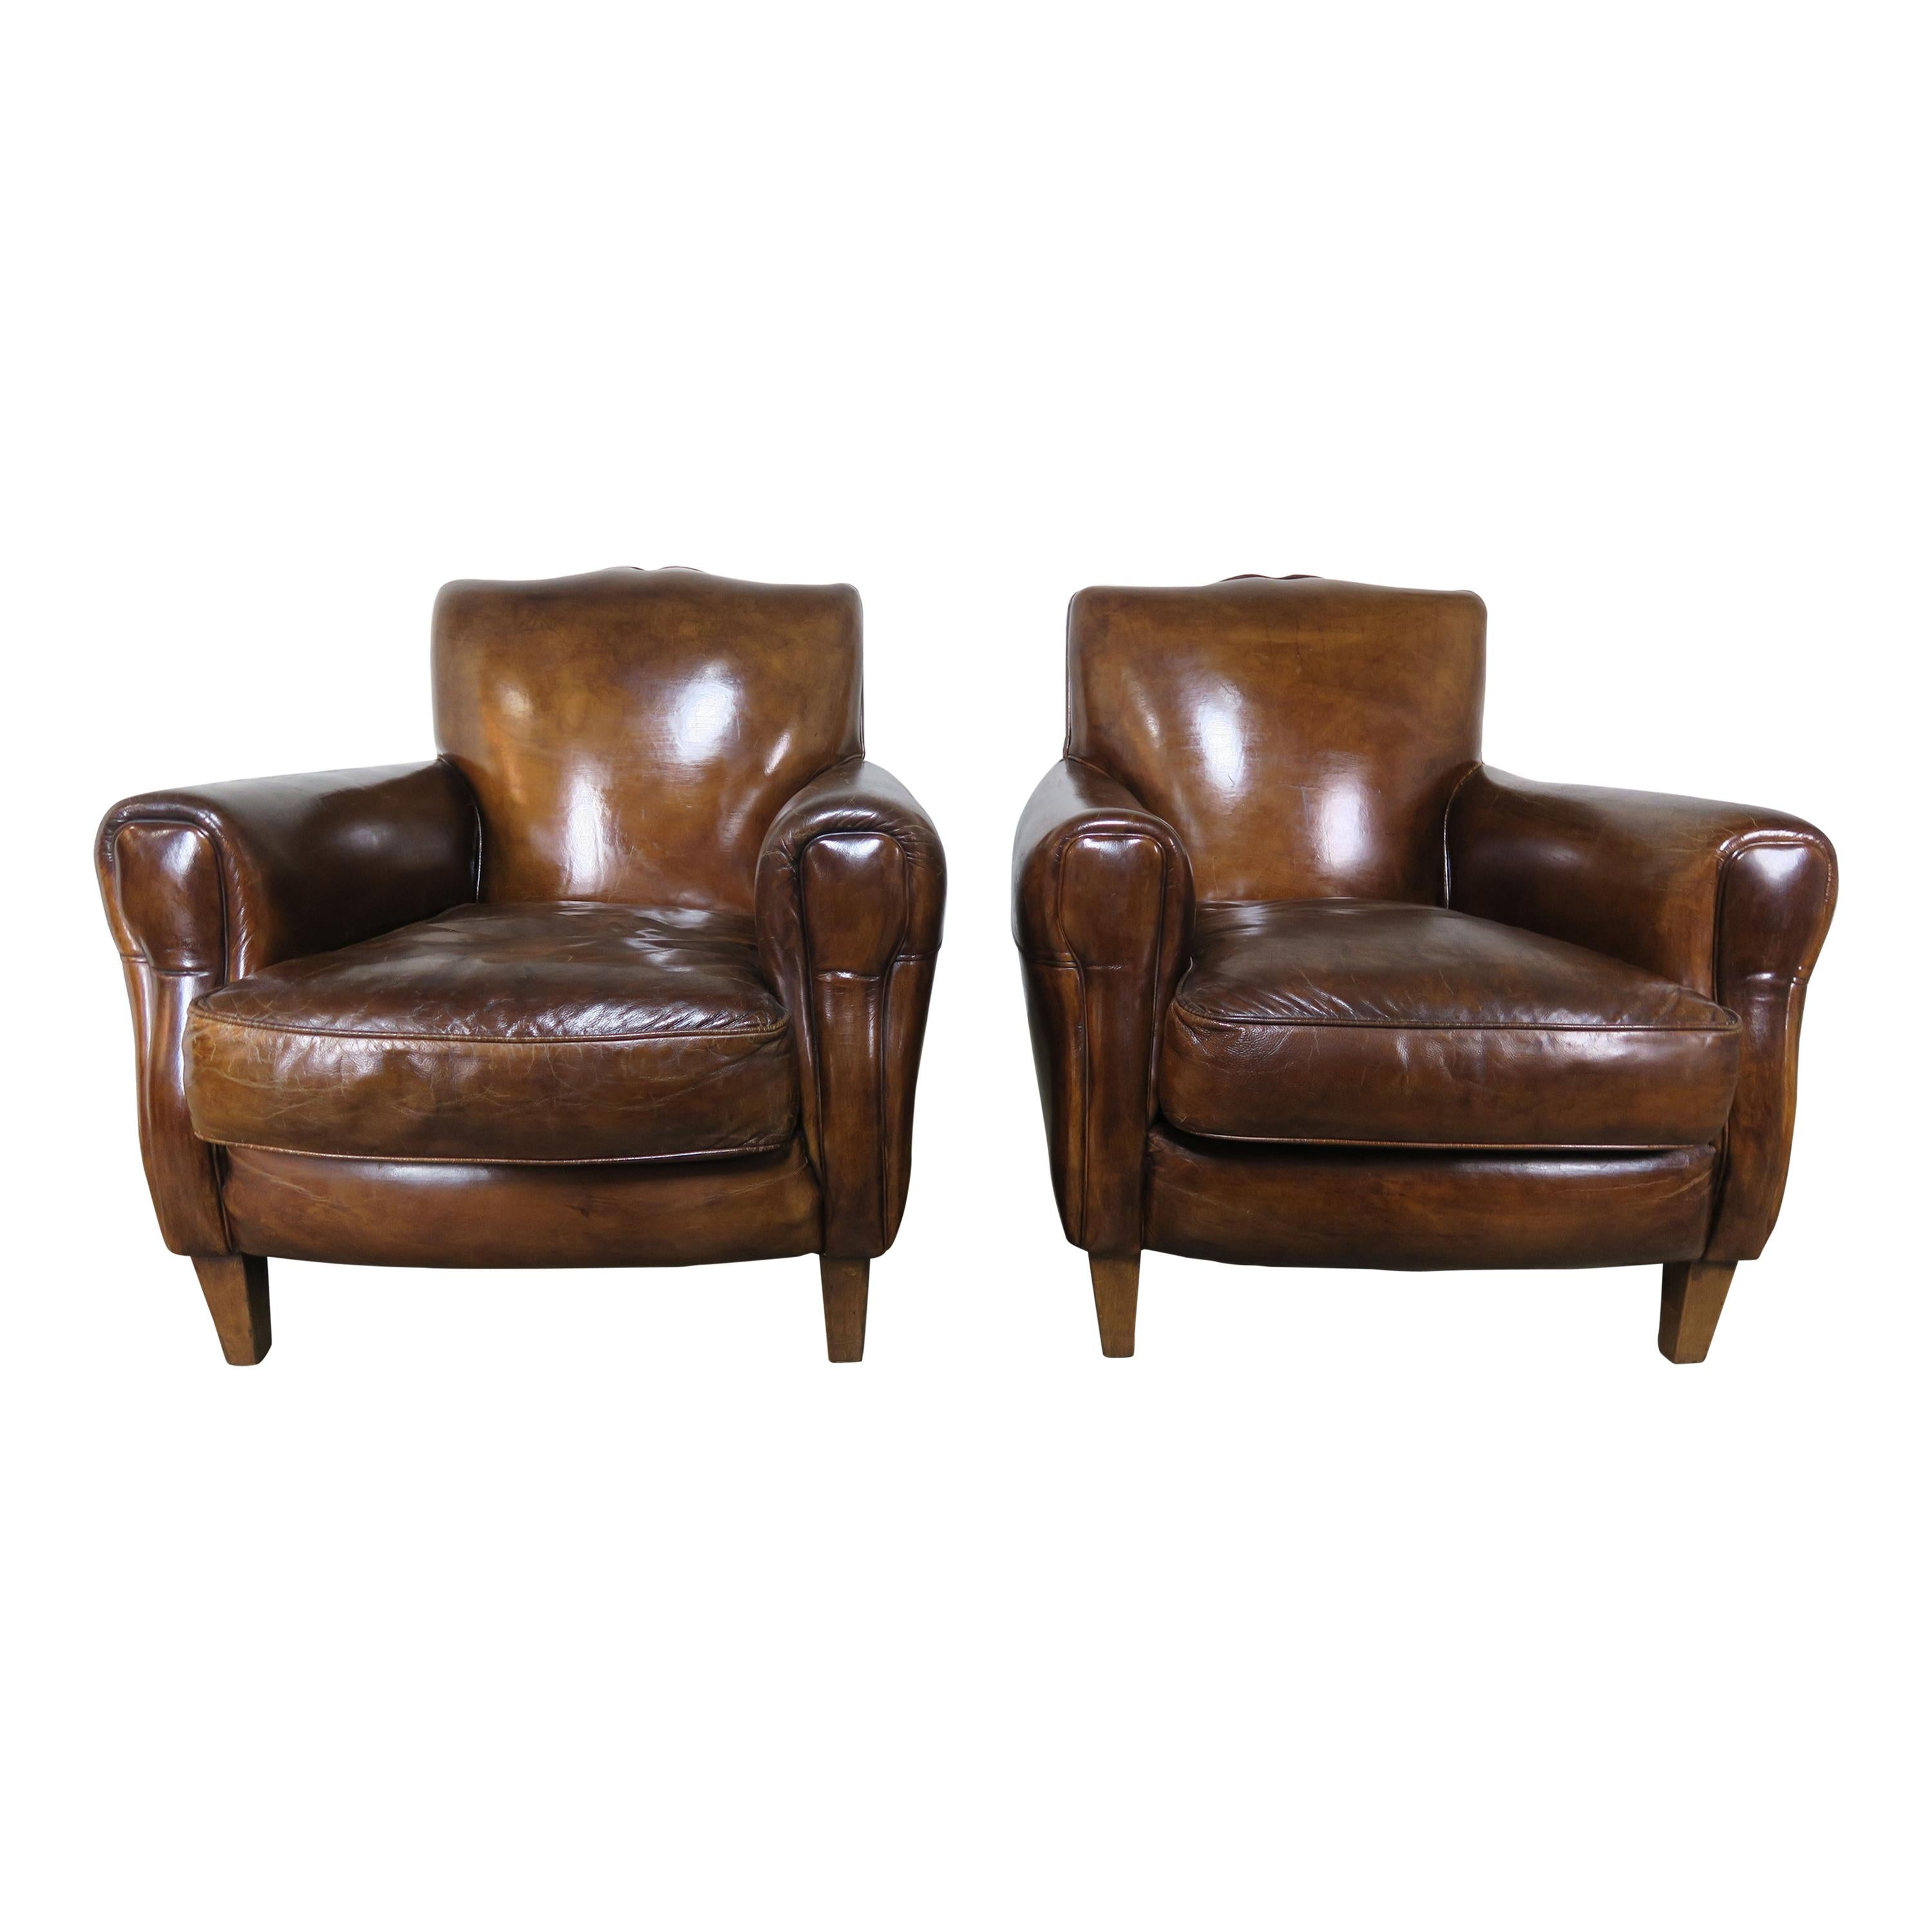 Pair of French Leather Deco Armchairs, circa 1930